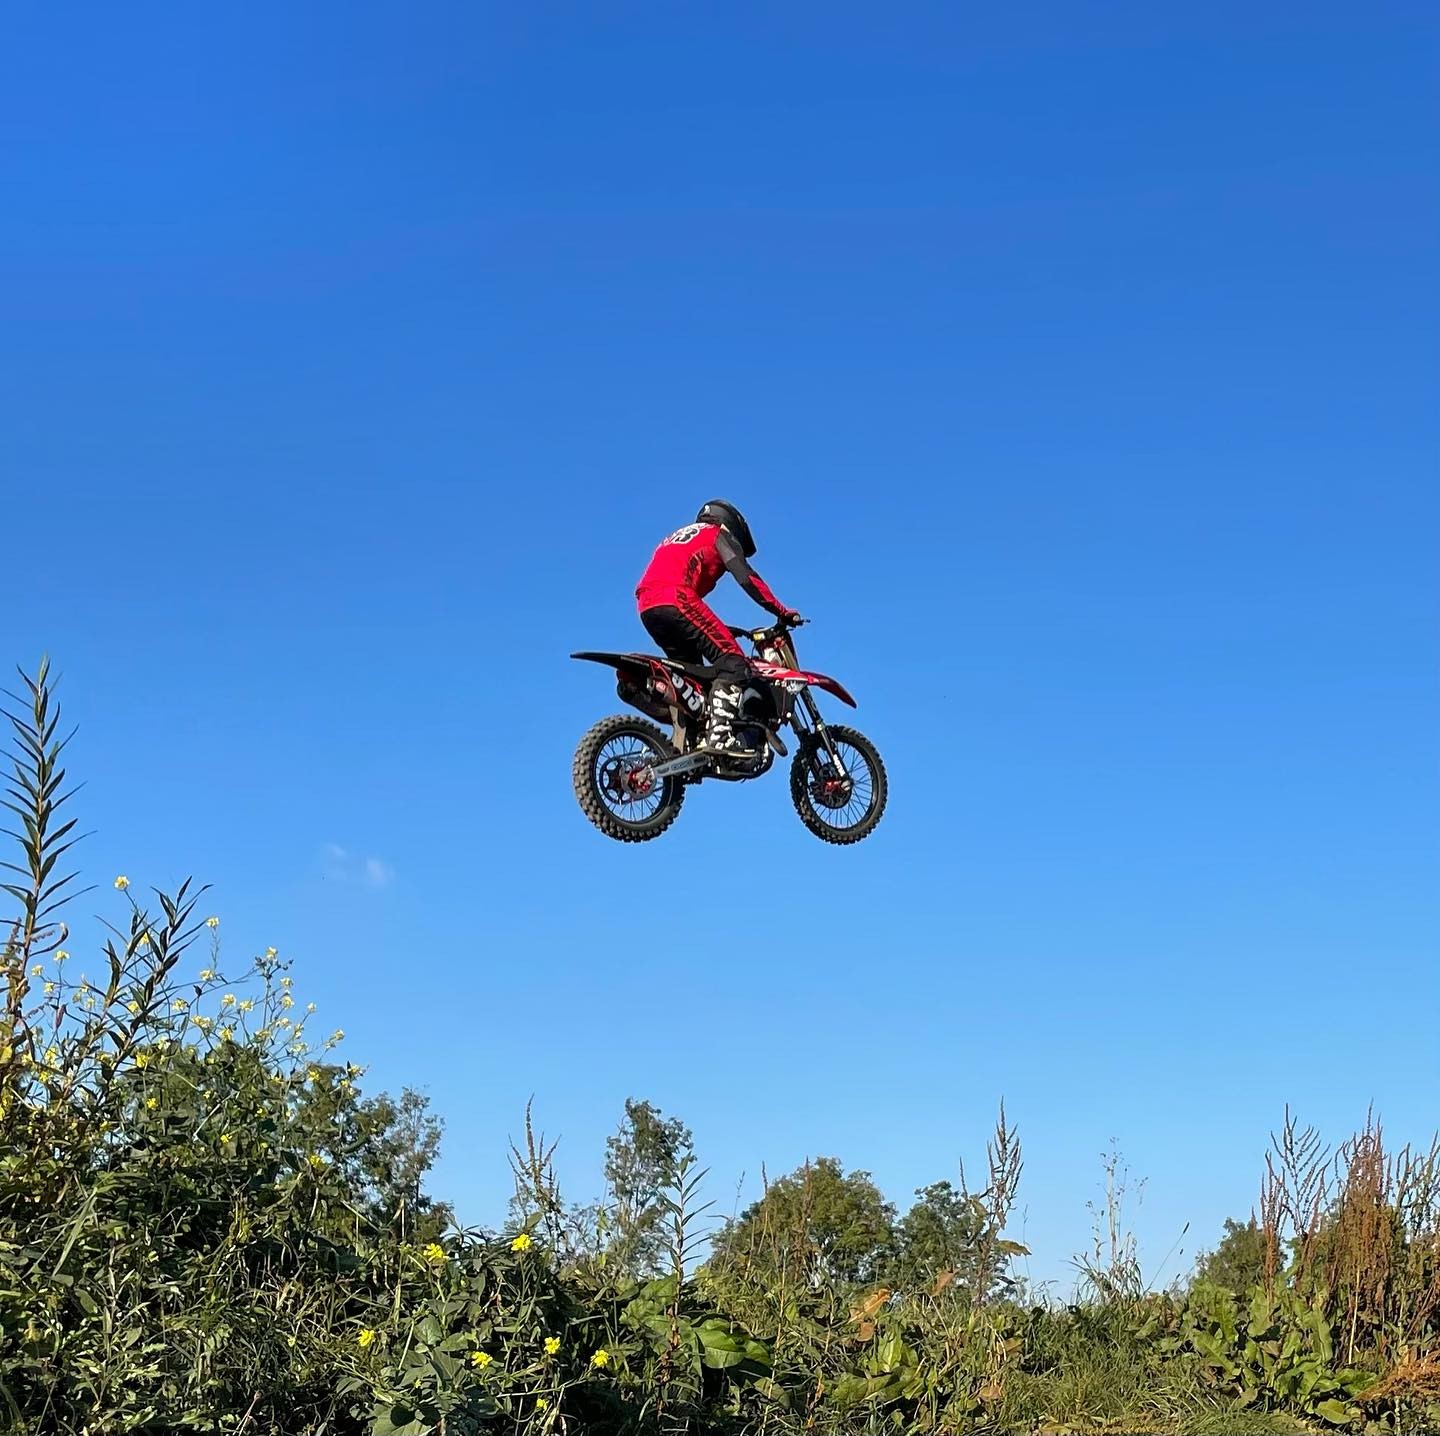 #flasbackfriday to #airportmx
Wish the upcoming weekend would look like this! 😃
Tired of that winter that is not even a real winter anymore... 
Who is riding this weekend?

#motosoul #motocross #mx #riding #flyhigh #freising #freisingerbaer #twentysuspension #motorradwaldmann #honda #crf450 #fox #xfighters @twentysuspension @motorradwaldmann @redbullspecteyewear @mscfreisingerbaer @semicolondigital @hondamotorrad_de @redbullxfighters